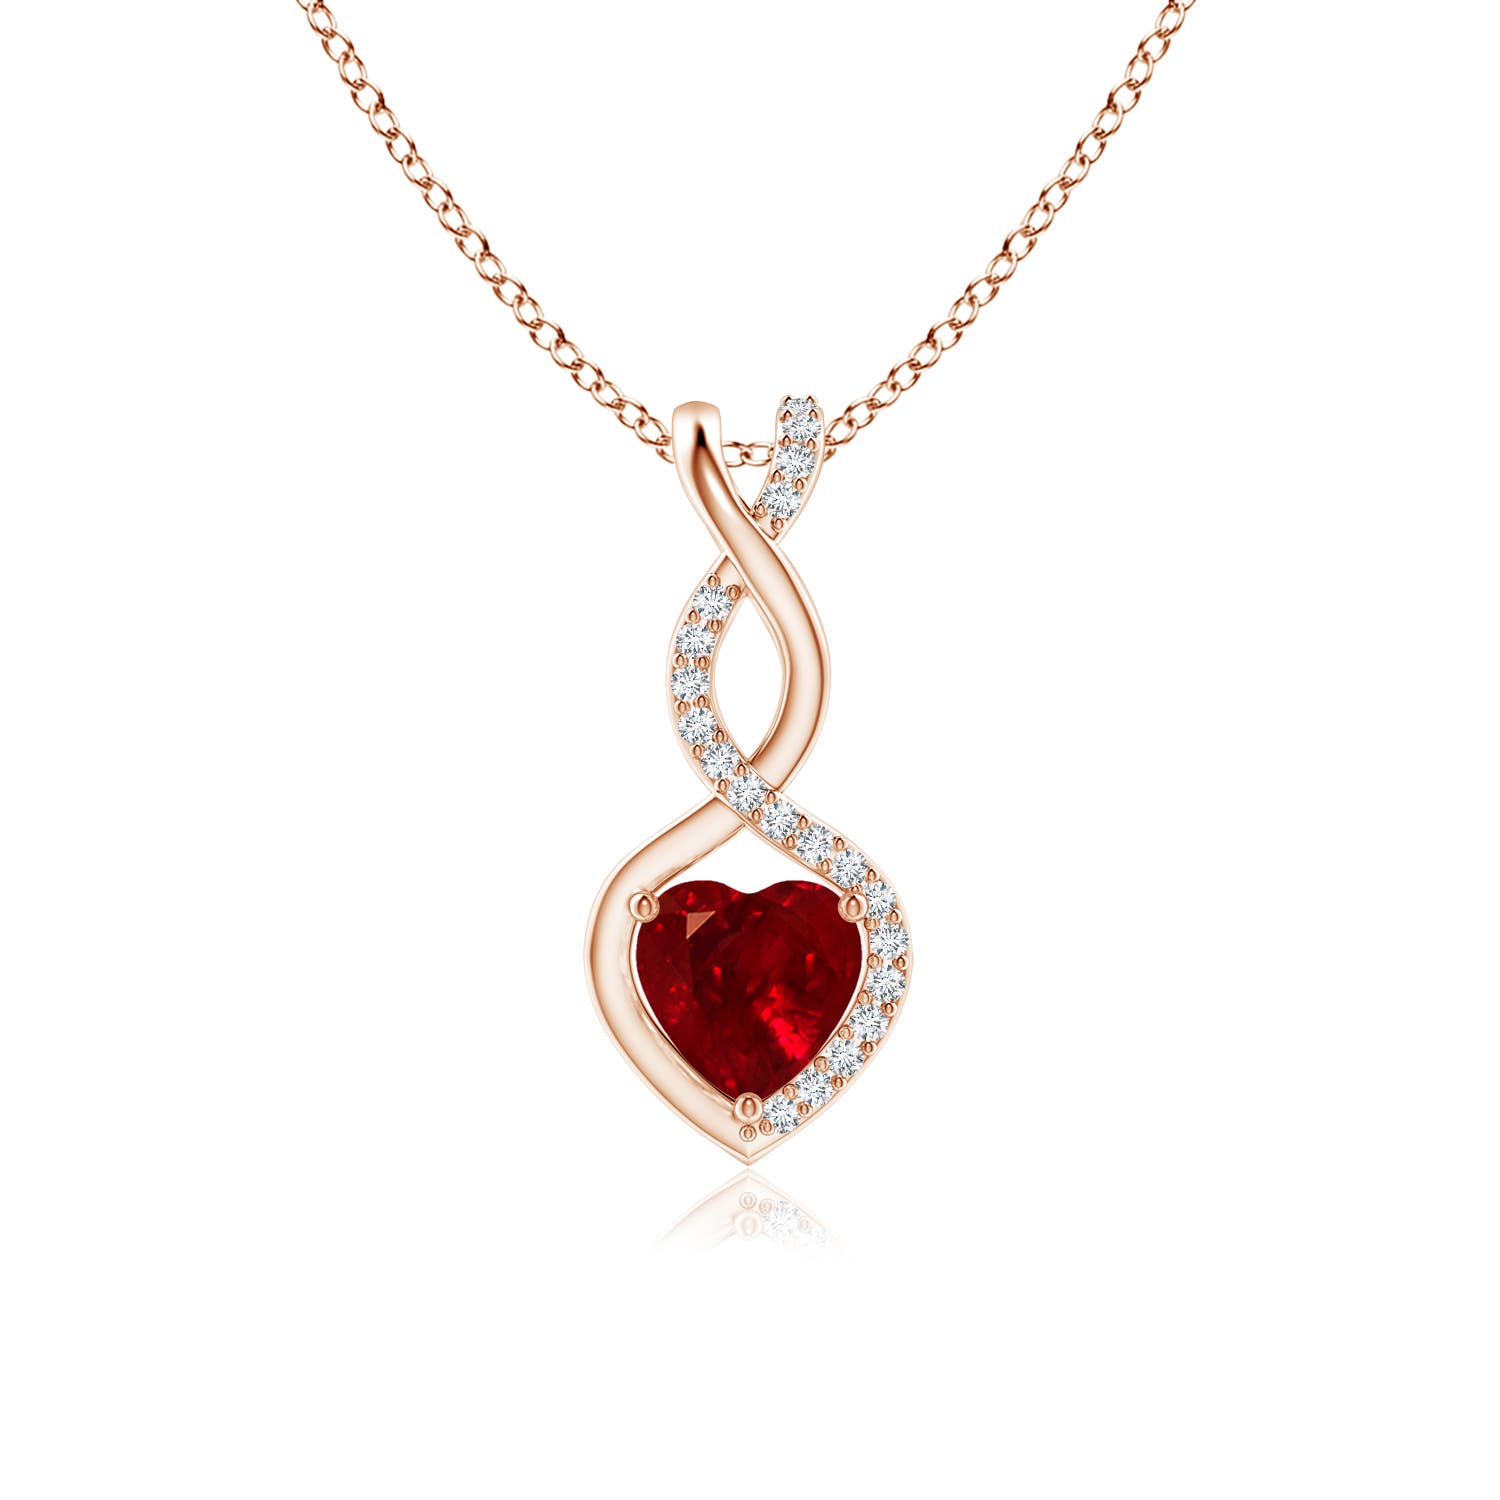 AAAA - Ruby / 0.61 CT / 14 KT Rose Gold